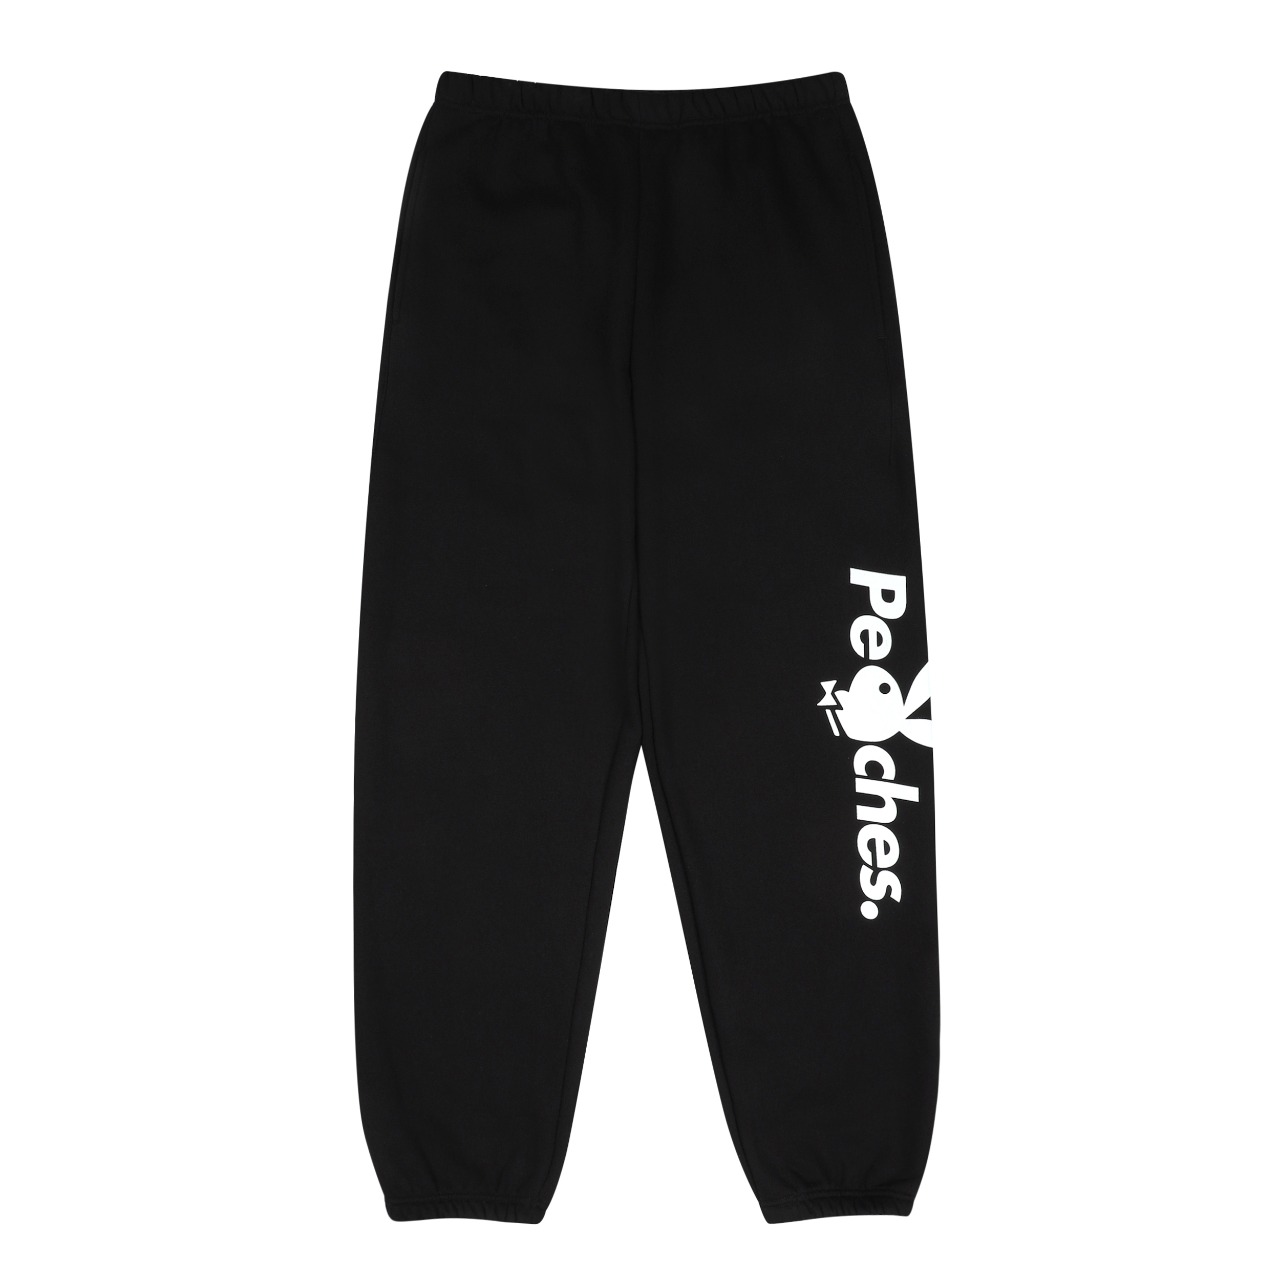 Clubhouse Sweatpants